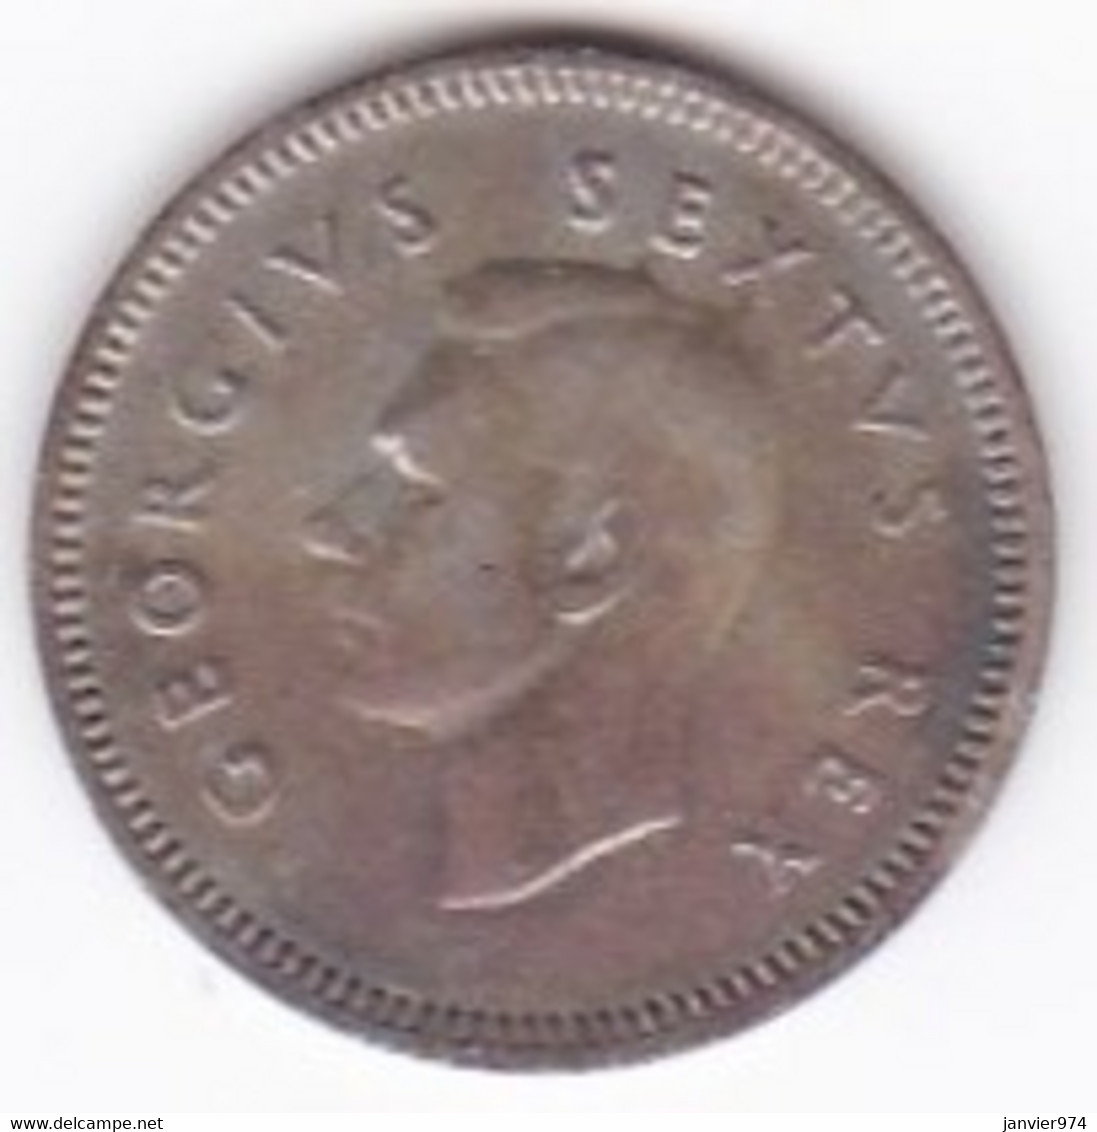 South Africa 3 Pence 1952, George VI , En Argent. KM# 35.2 - South Africa